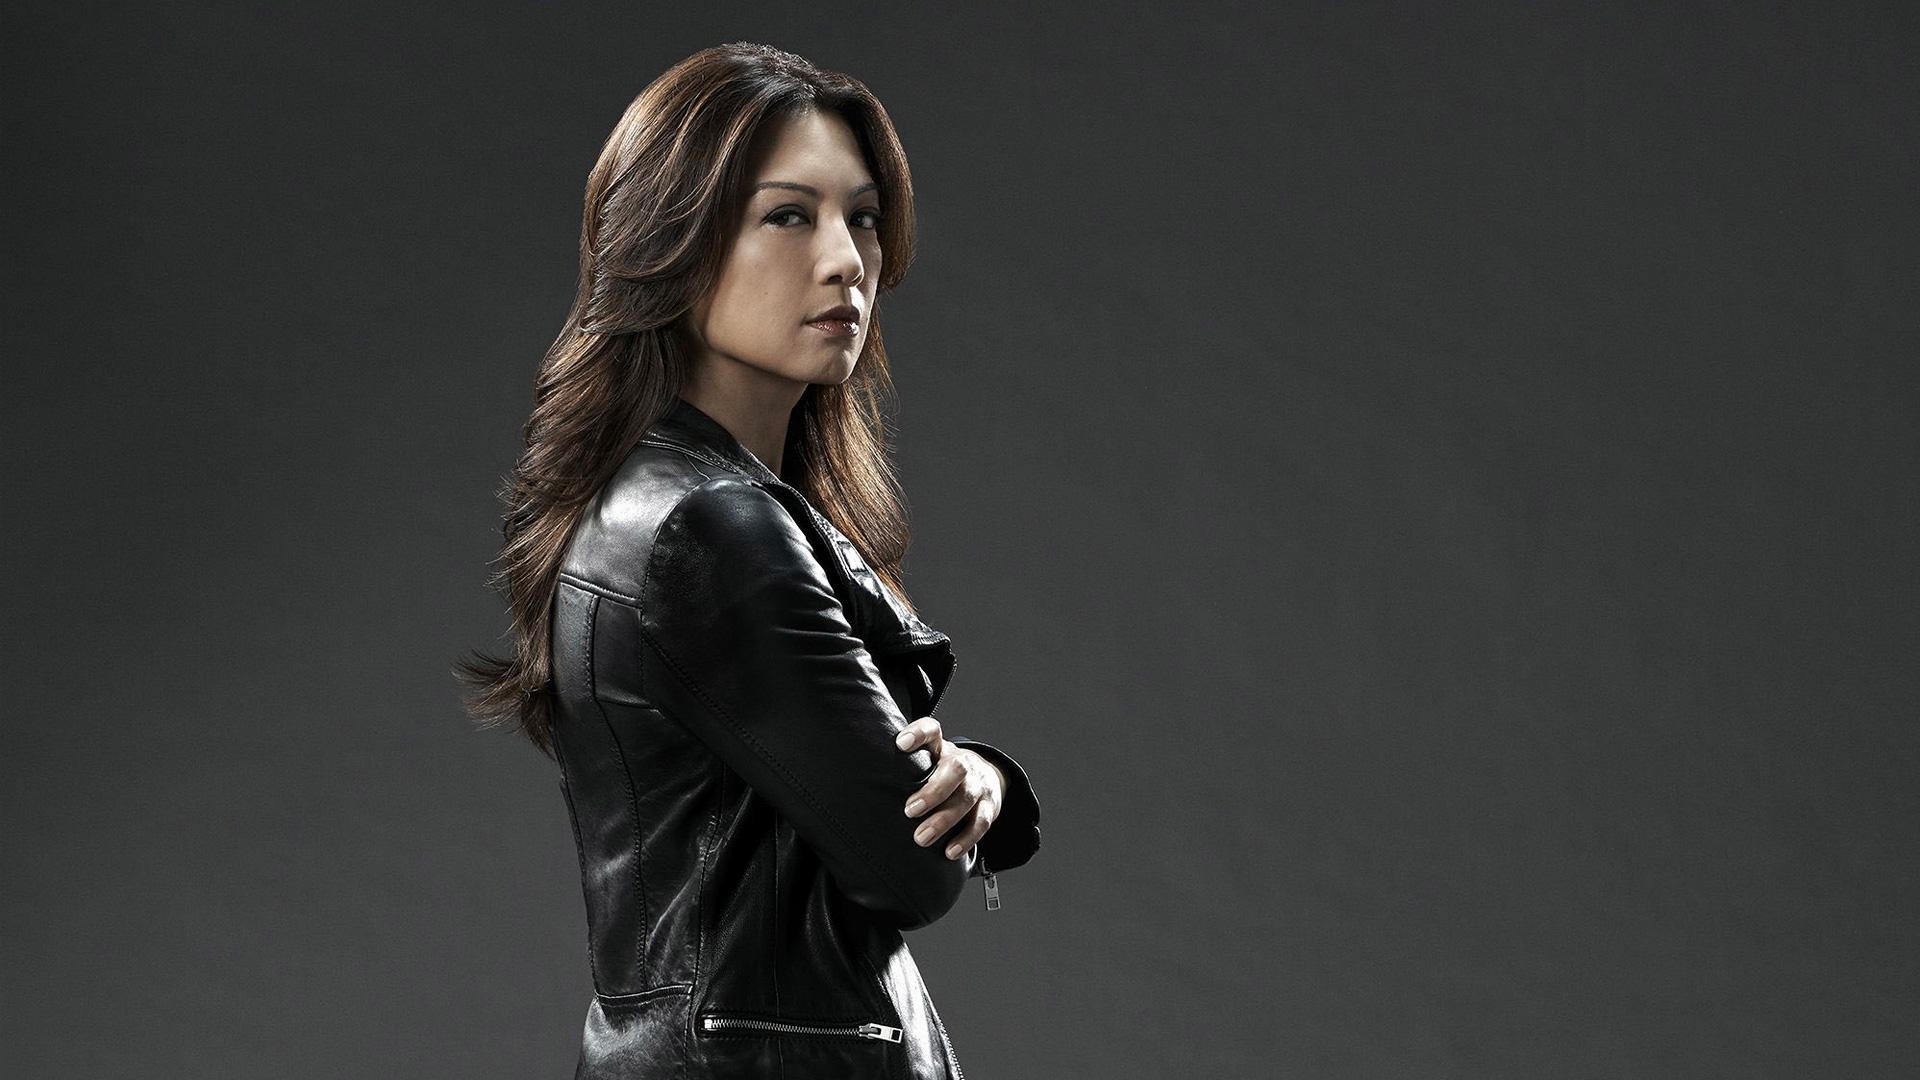 Wallpaper.wiki Pictures Agents Of Shield PIC WPC0014040